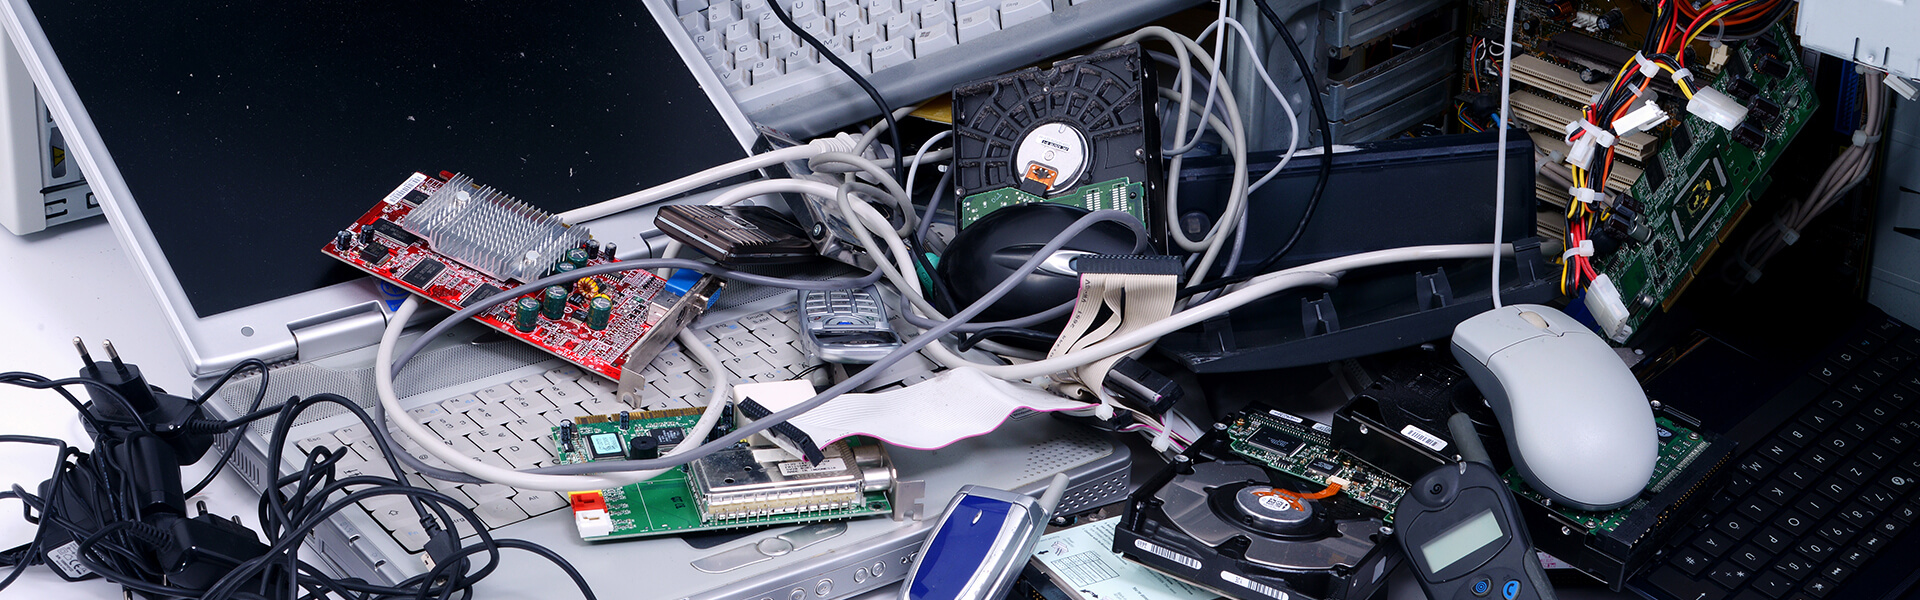 Electronic Waste For Rumpke E Waste Recycling Services